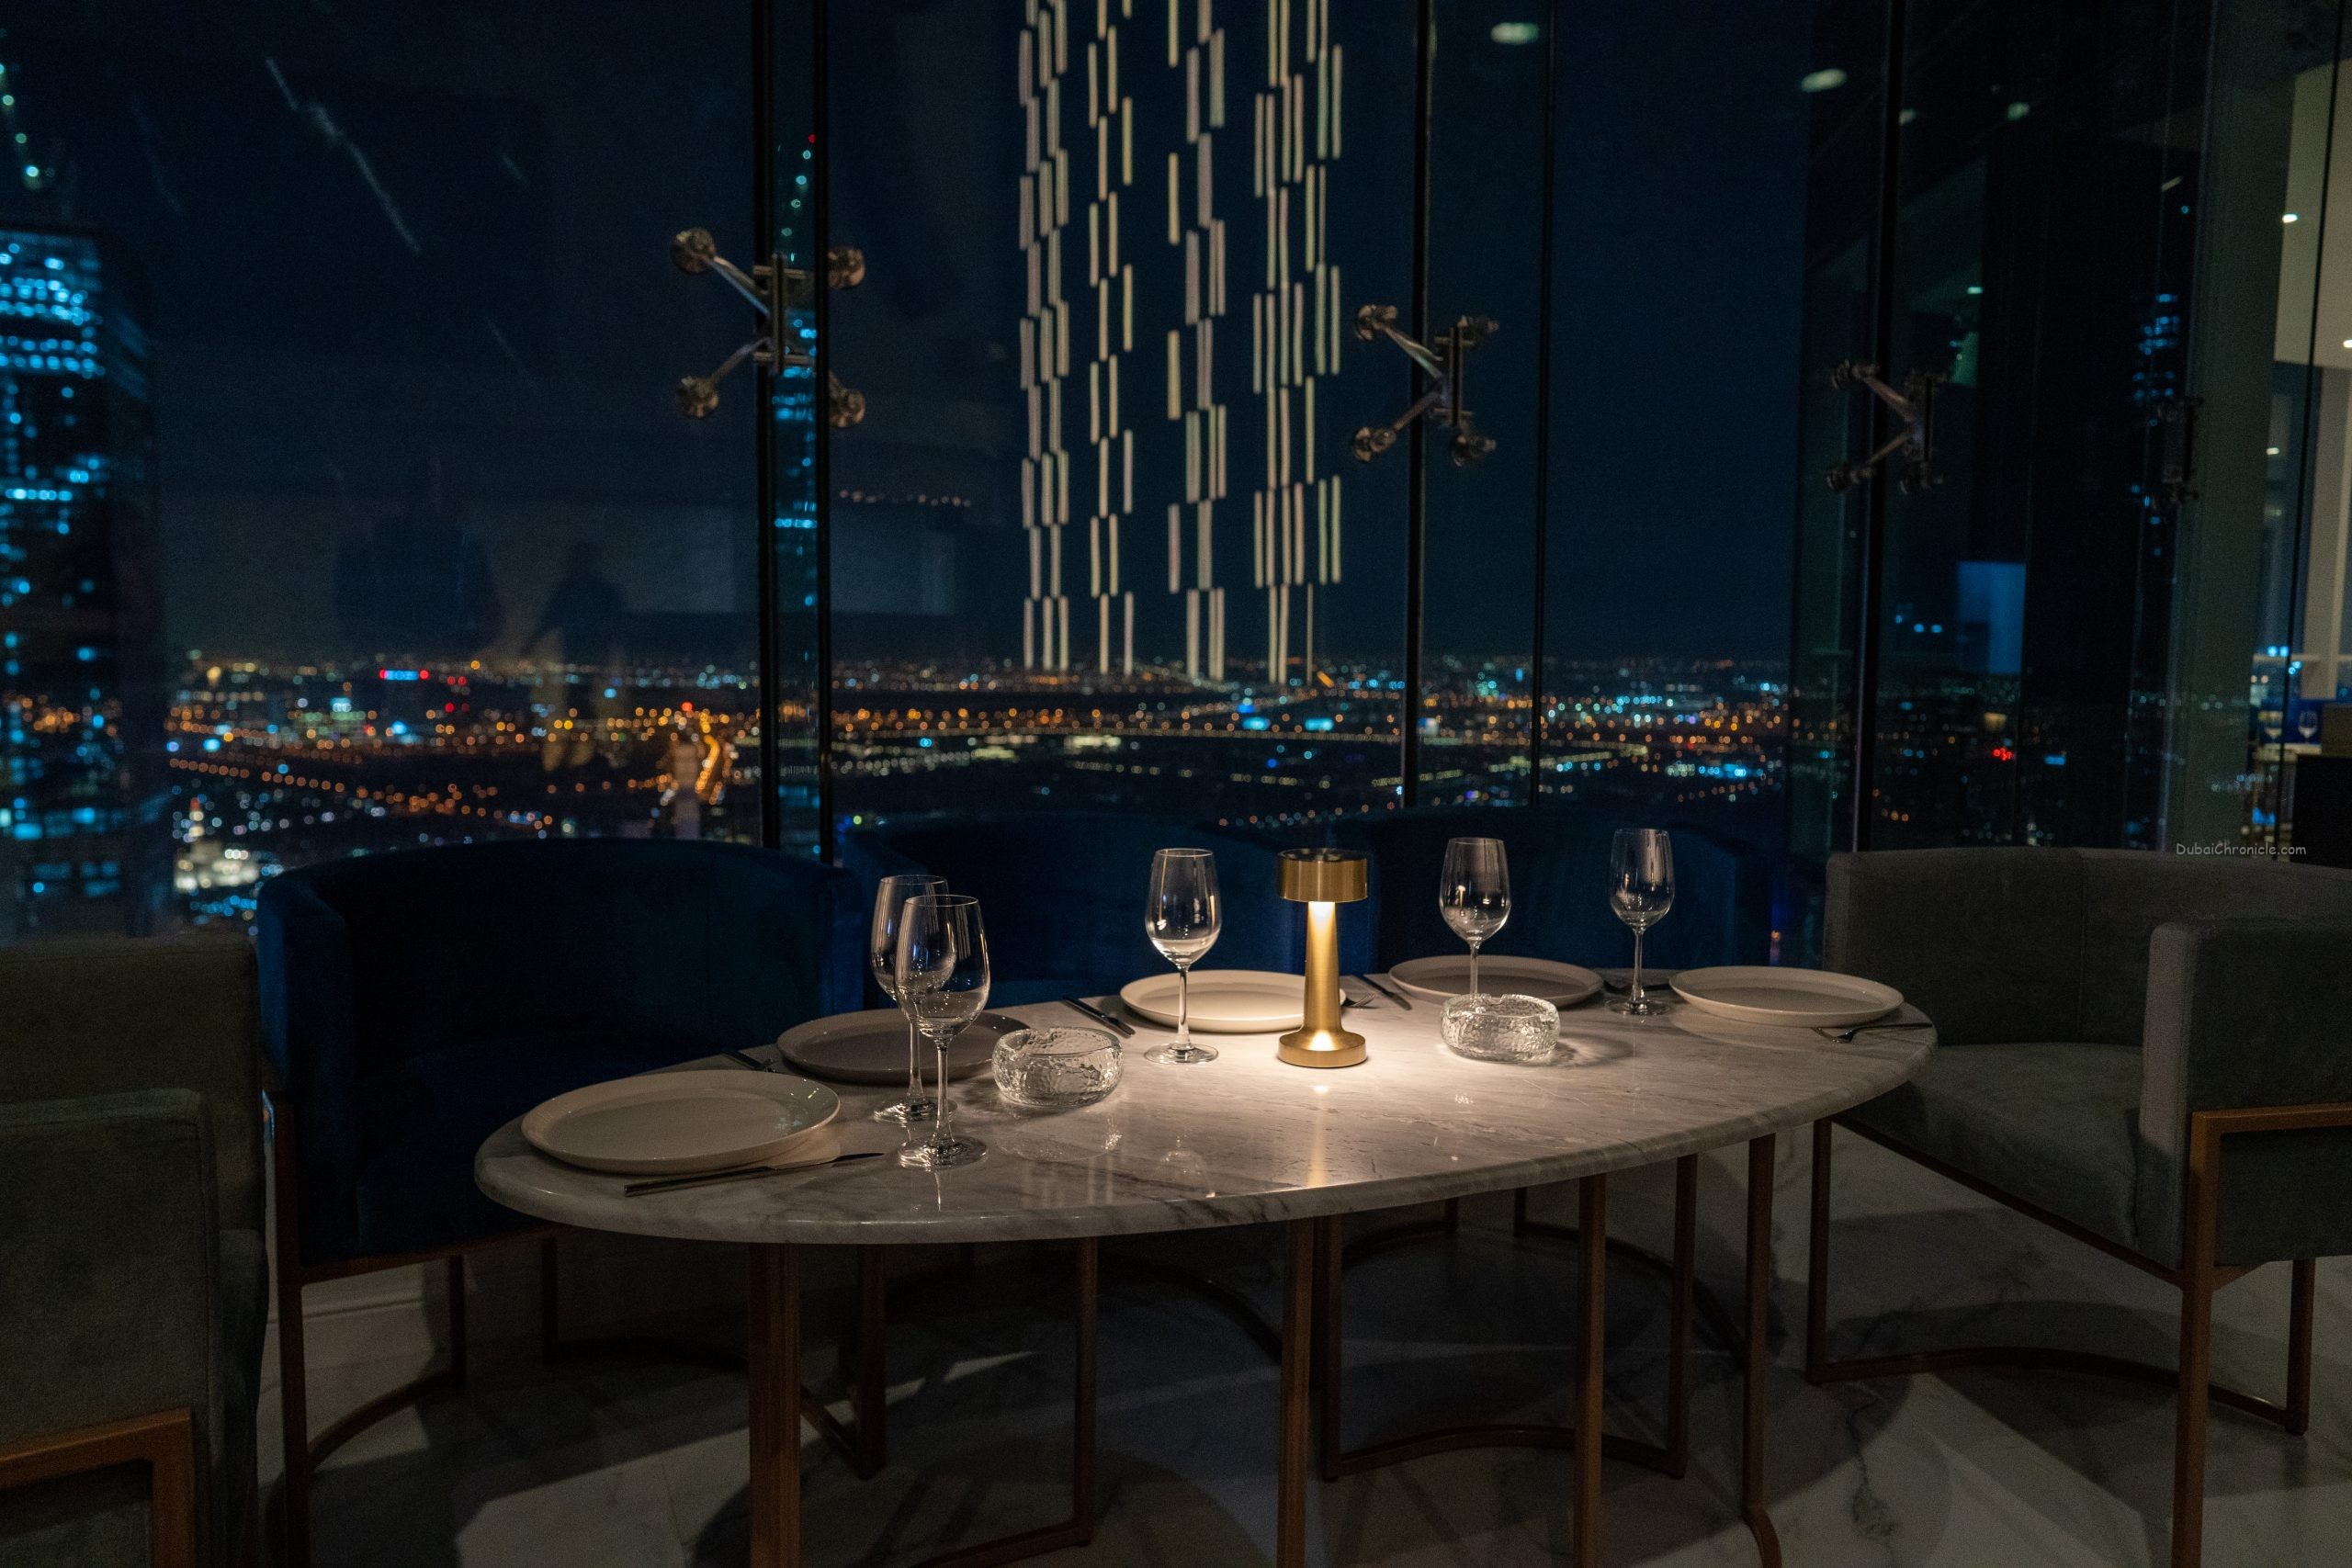 53 is the highest dinner show in the GCC, located on the 53rd floor of the Sheraton Grand Hotel on Sheik Zayed Road, is finally opening its doors on June 15,  2022.